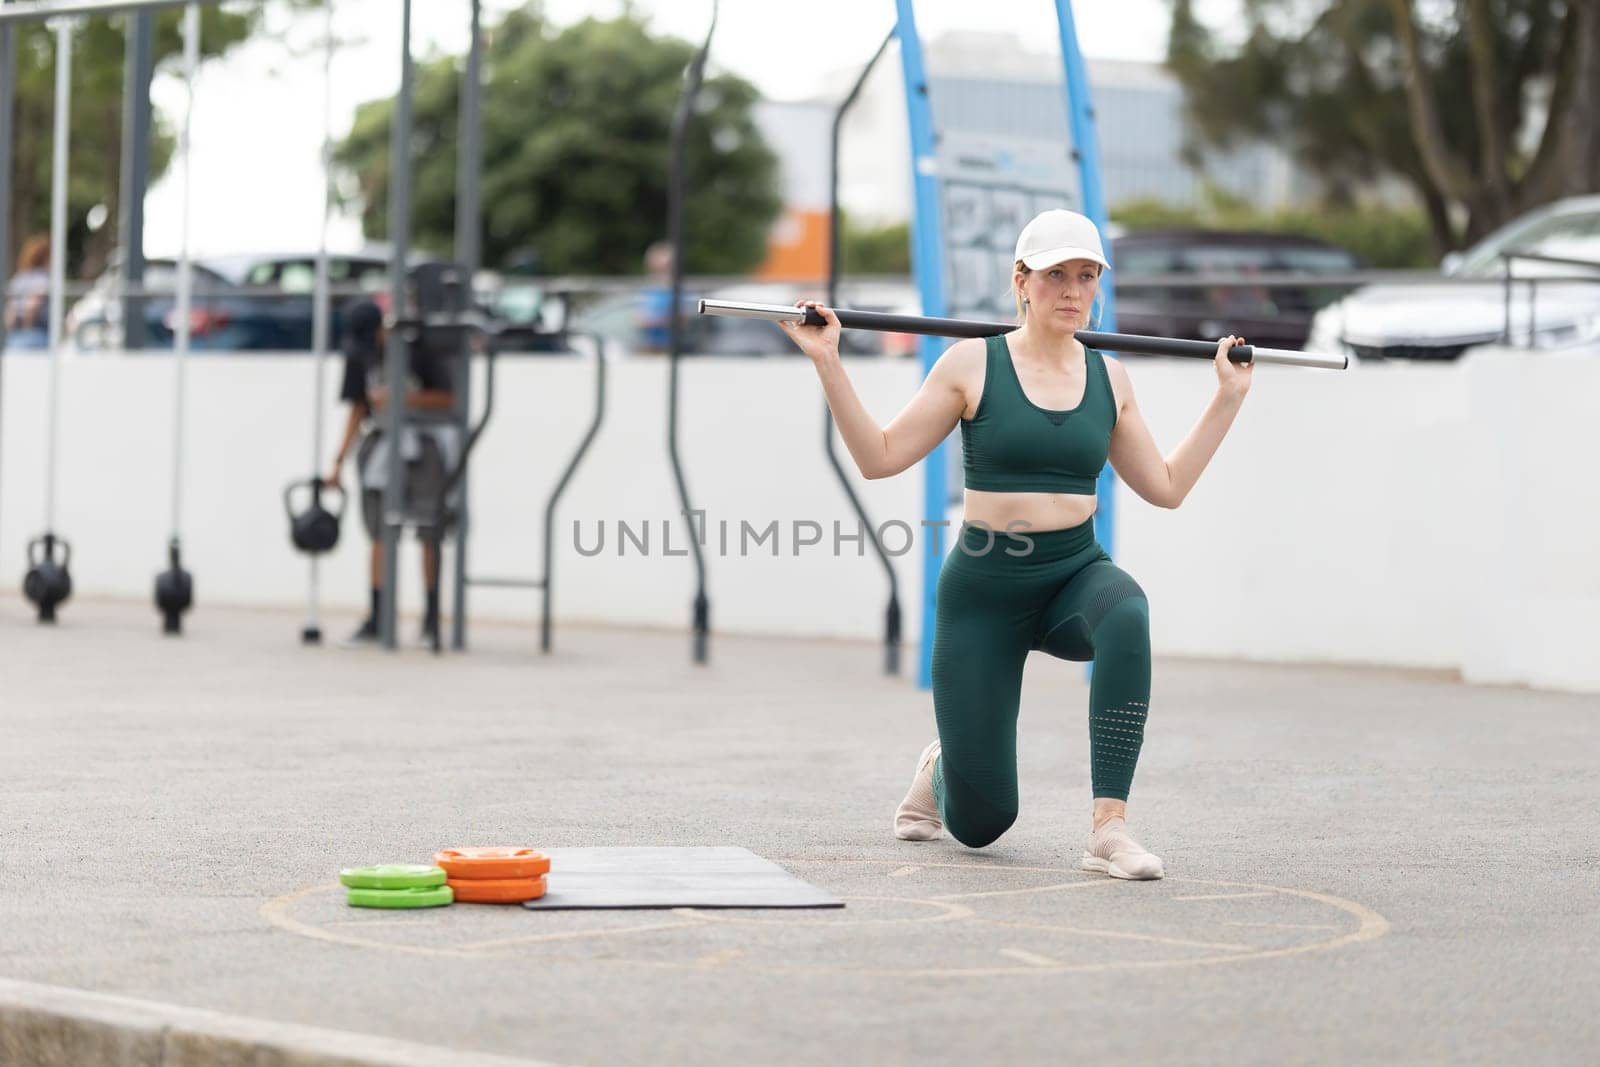 Adult athletic woman lifting a barbell on her shoulders. Mid shot